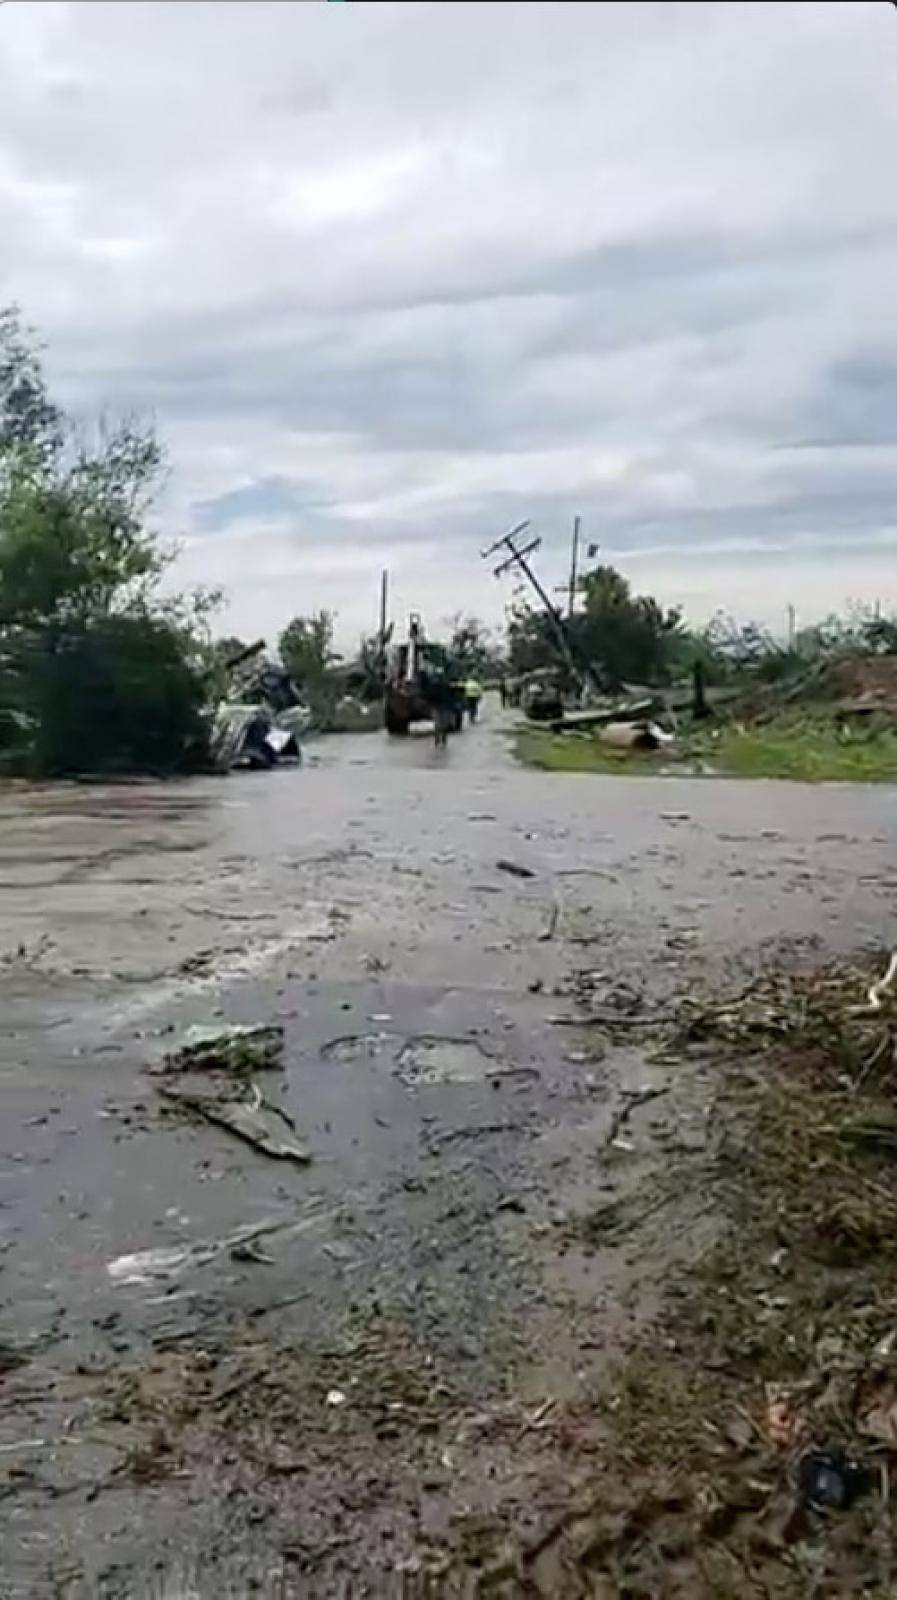 People work to clear debris in the aftermath of a tornado in Franklin, Texas, U.S., in this still image from social media video